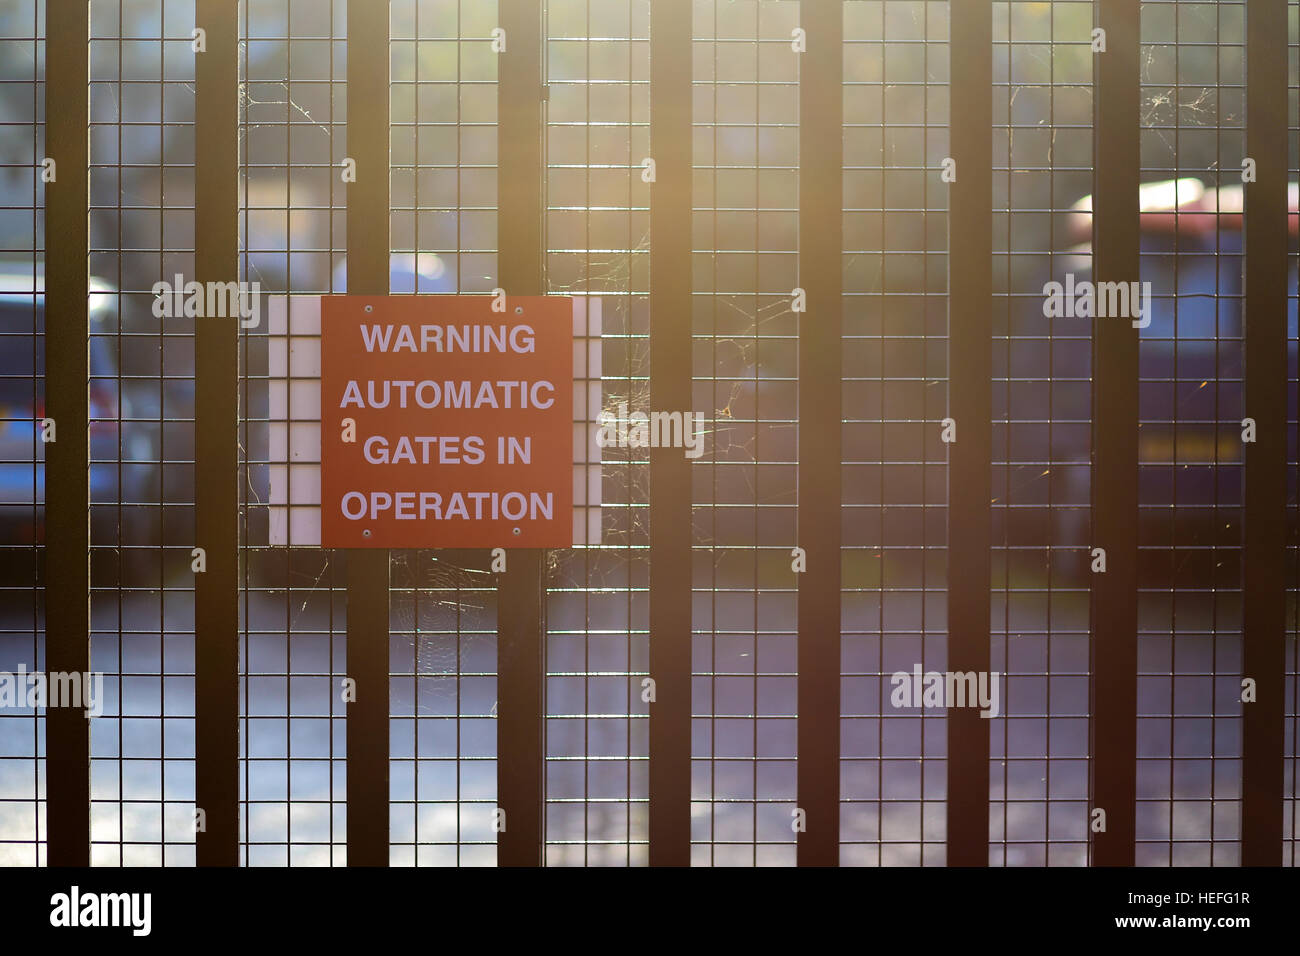 Warning automatic gates in operation, red sign on metal gate in full sun Stock Photo